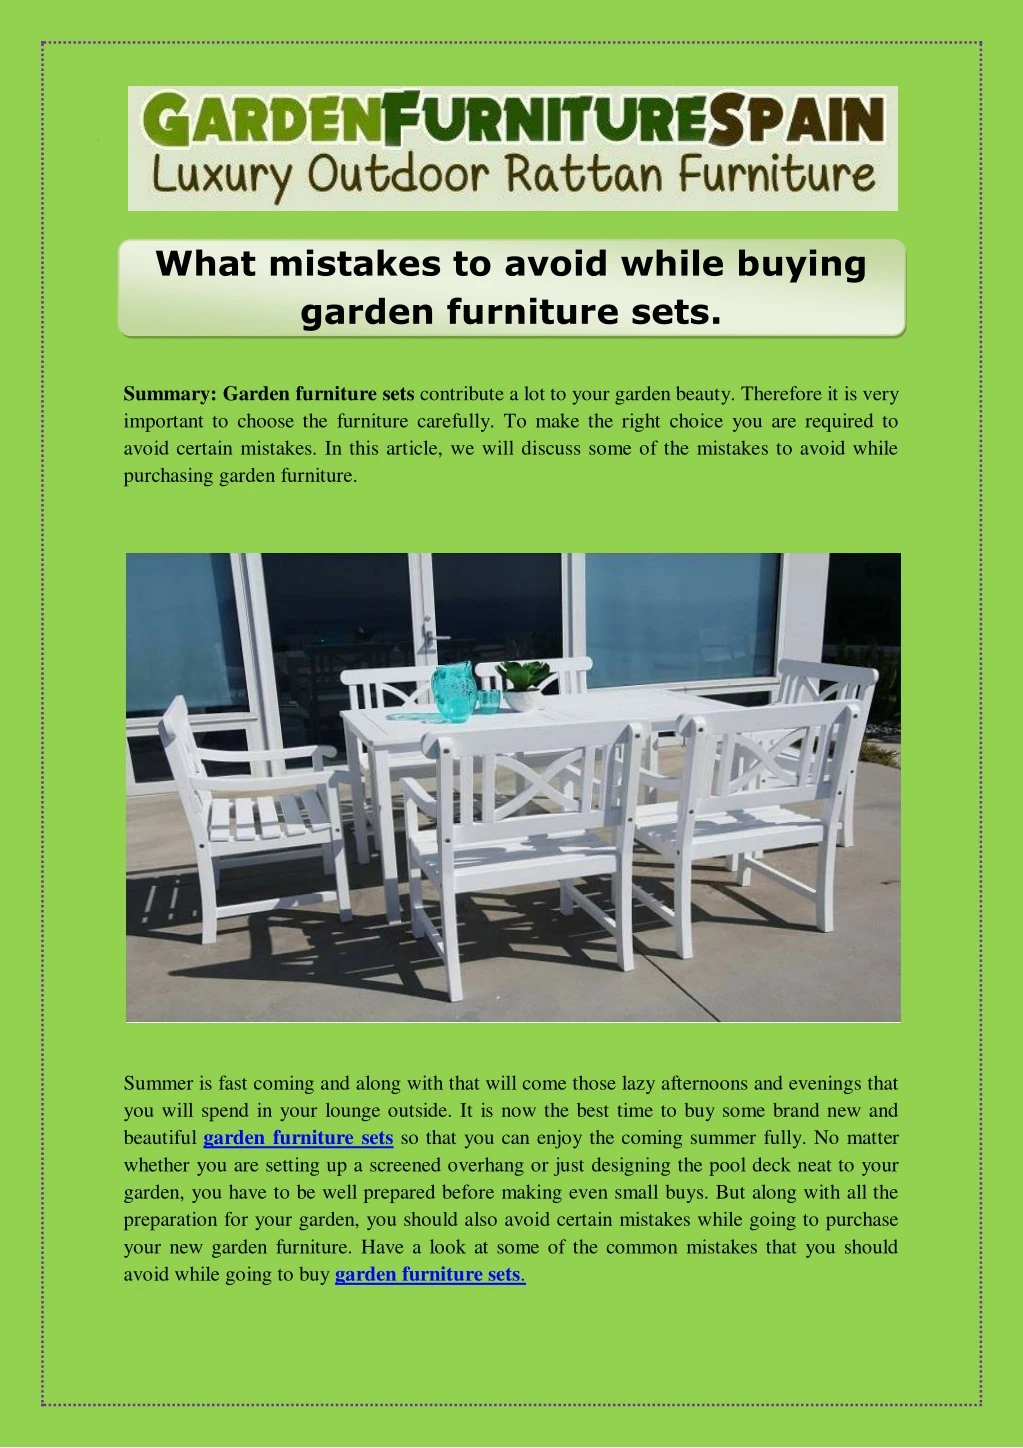 what mistakes to avoid while buying garden